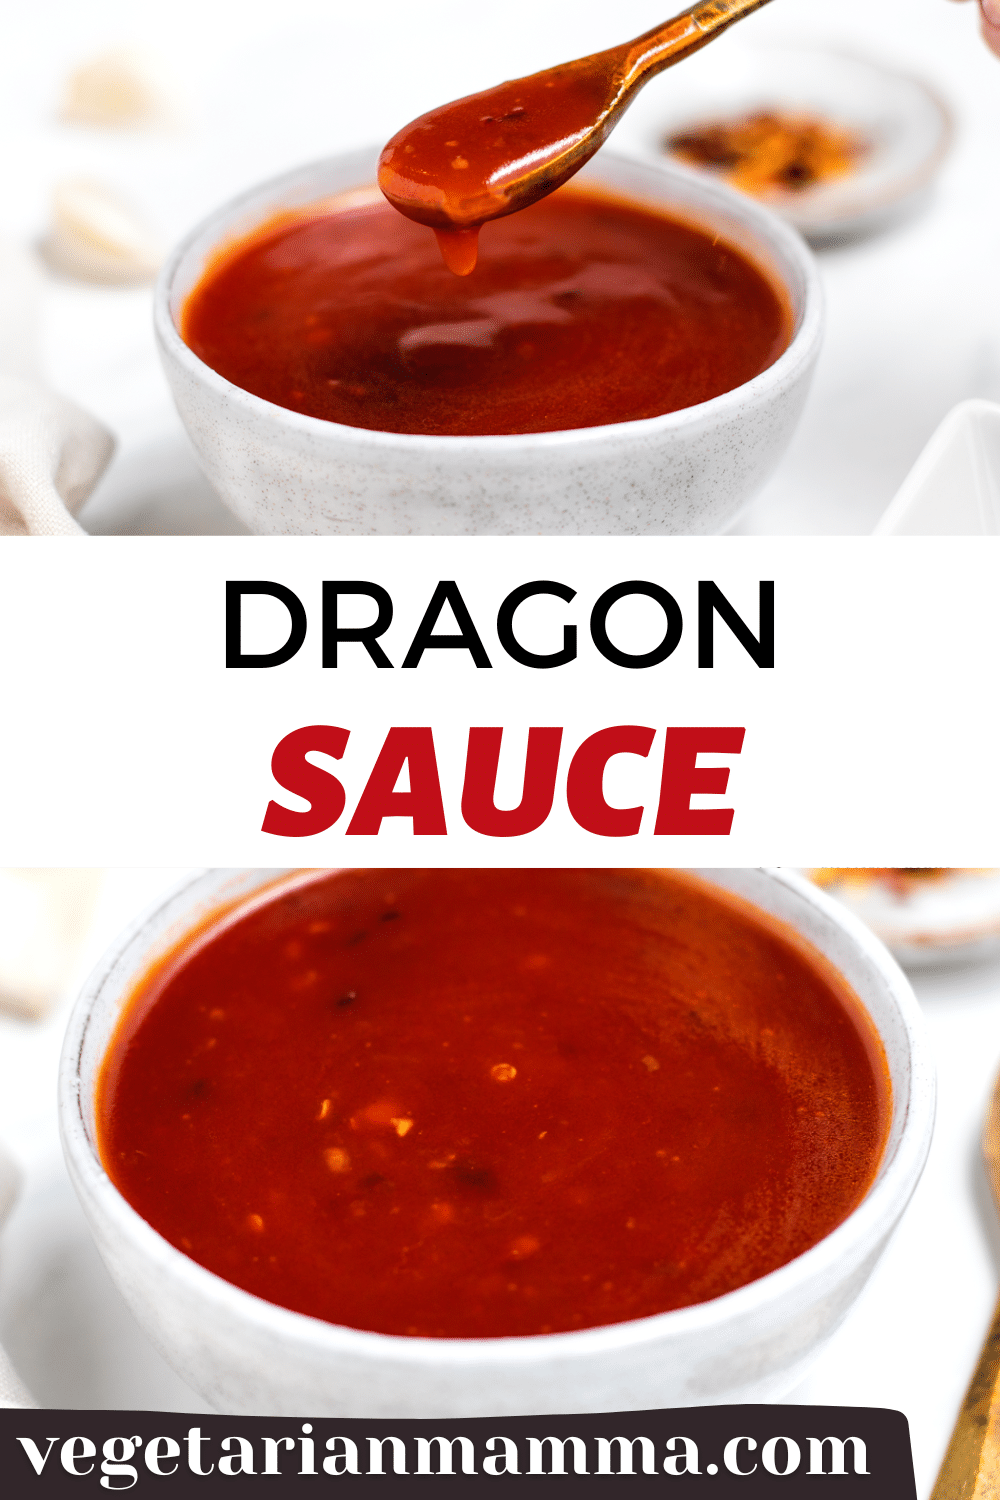 Spicy, flavorful Dragon Sauce is a sweet and spicy condiment with Asian flair! If you like a little spice, you're going to want to put this stuff on everything, from veggie burgers to roasted potatoes.